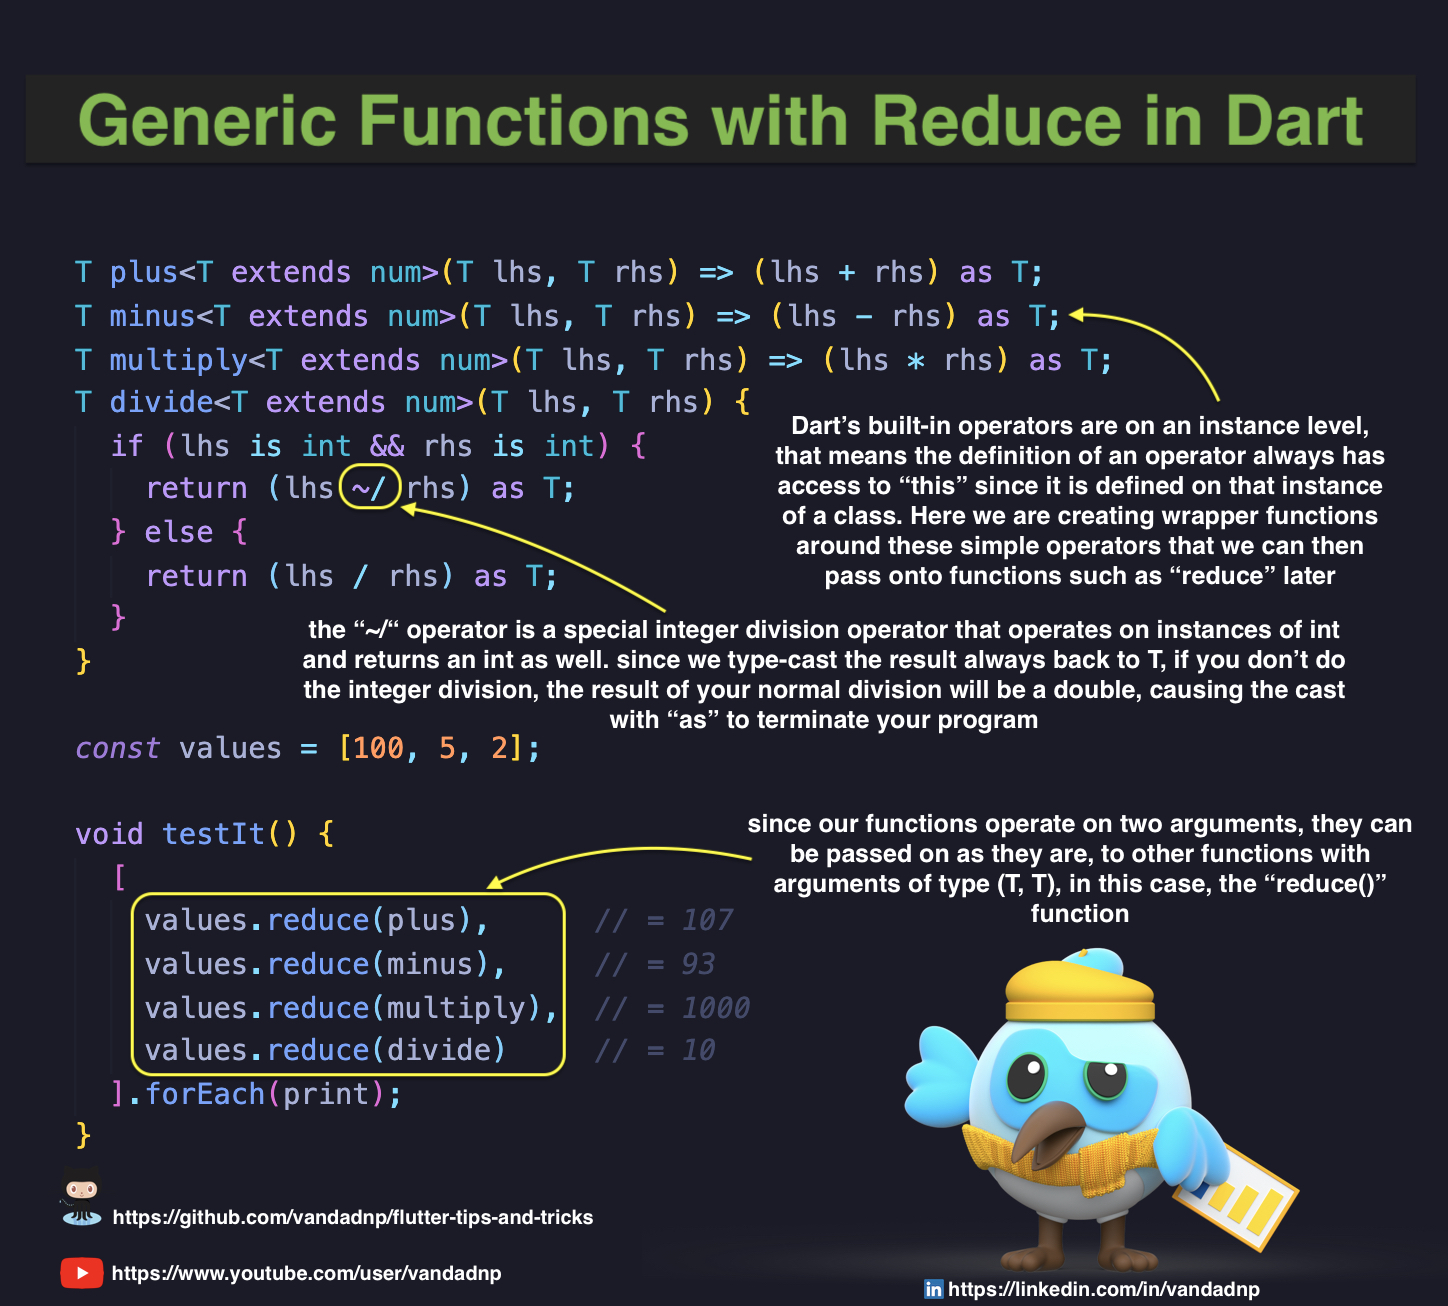 generic-functions-with-reduce-in-dart.jpg